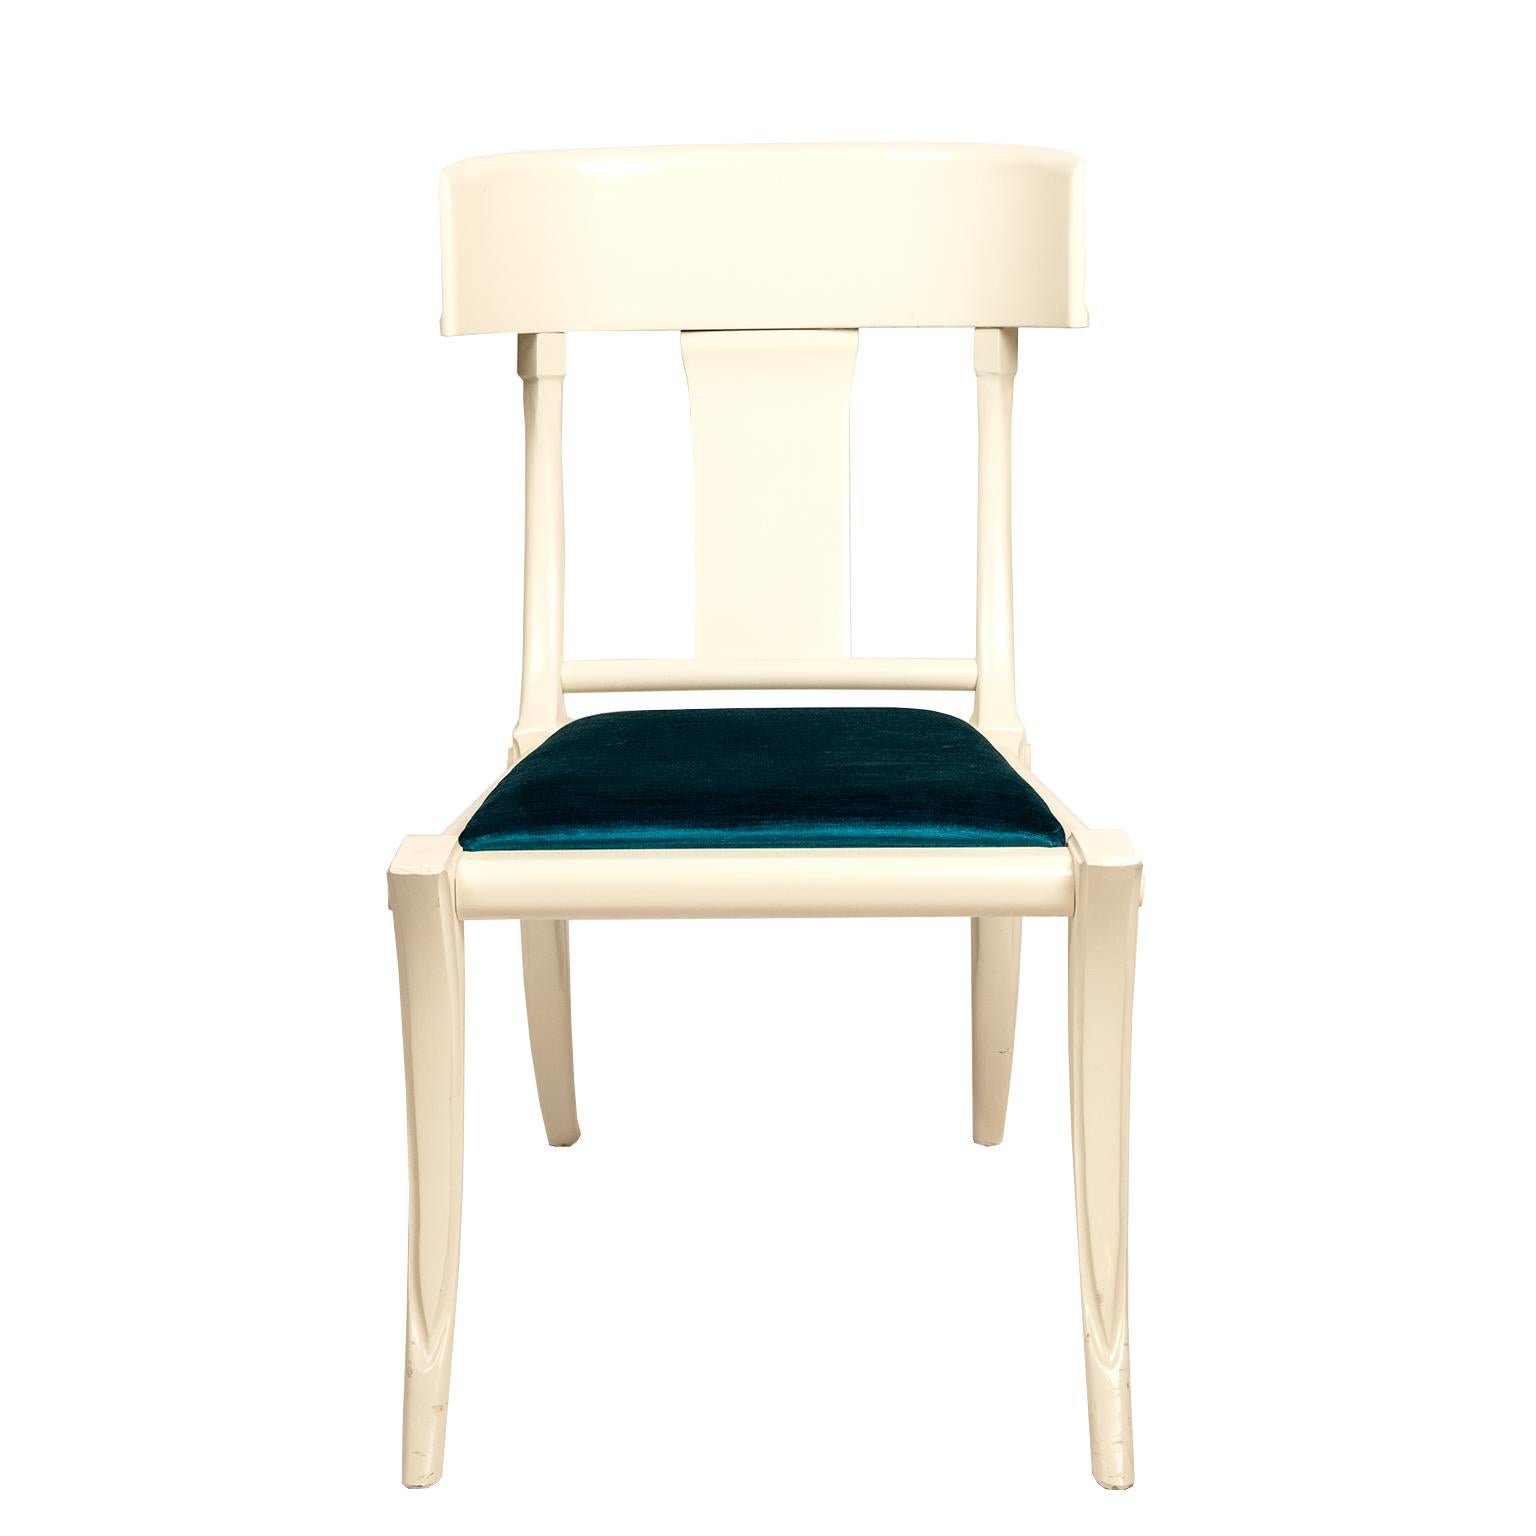 These generous classic klismos chairs are timeless beauties that have come directly from a movie set based on Elvis’s relationship with Prescilla in the 50’s and 60’s. They are very similar in style and colour to the ones Elvis and Prescilla shared